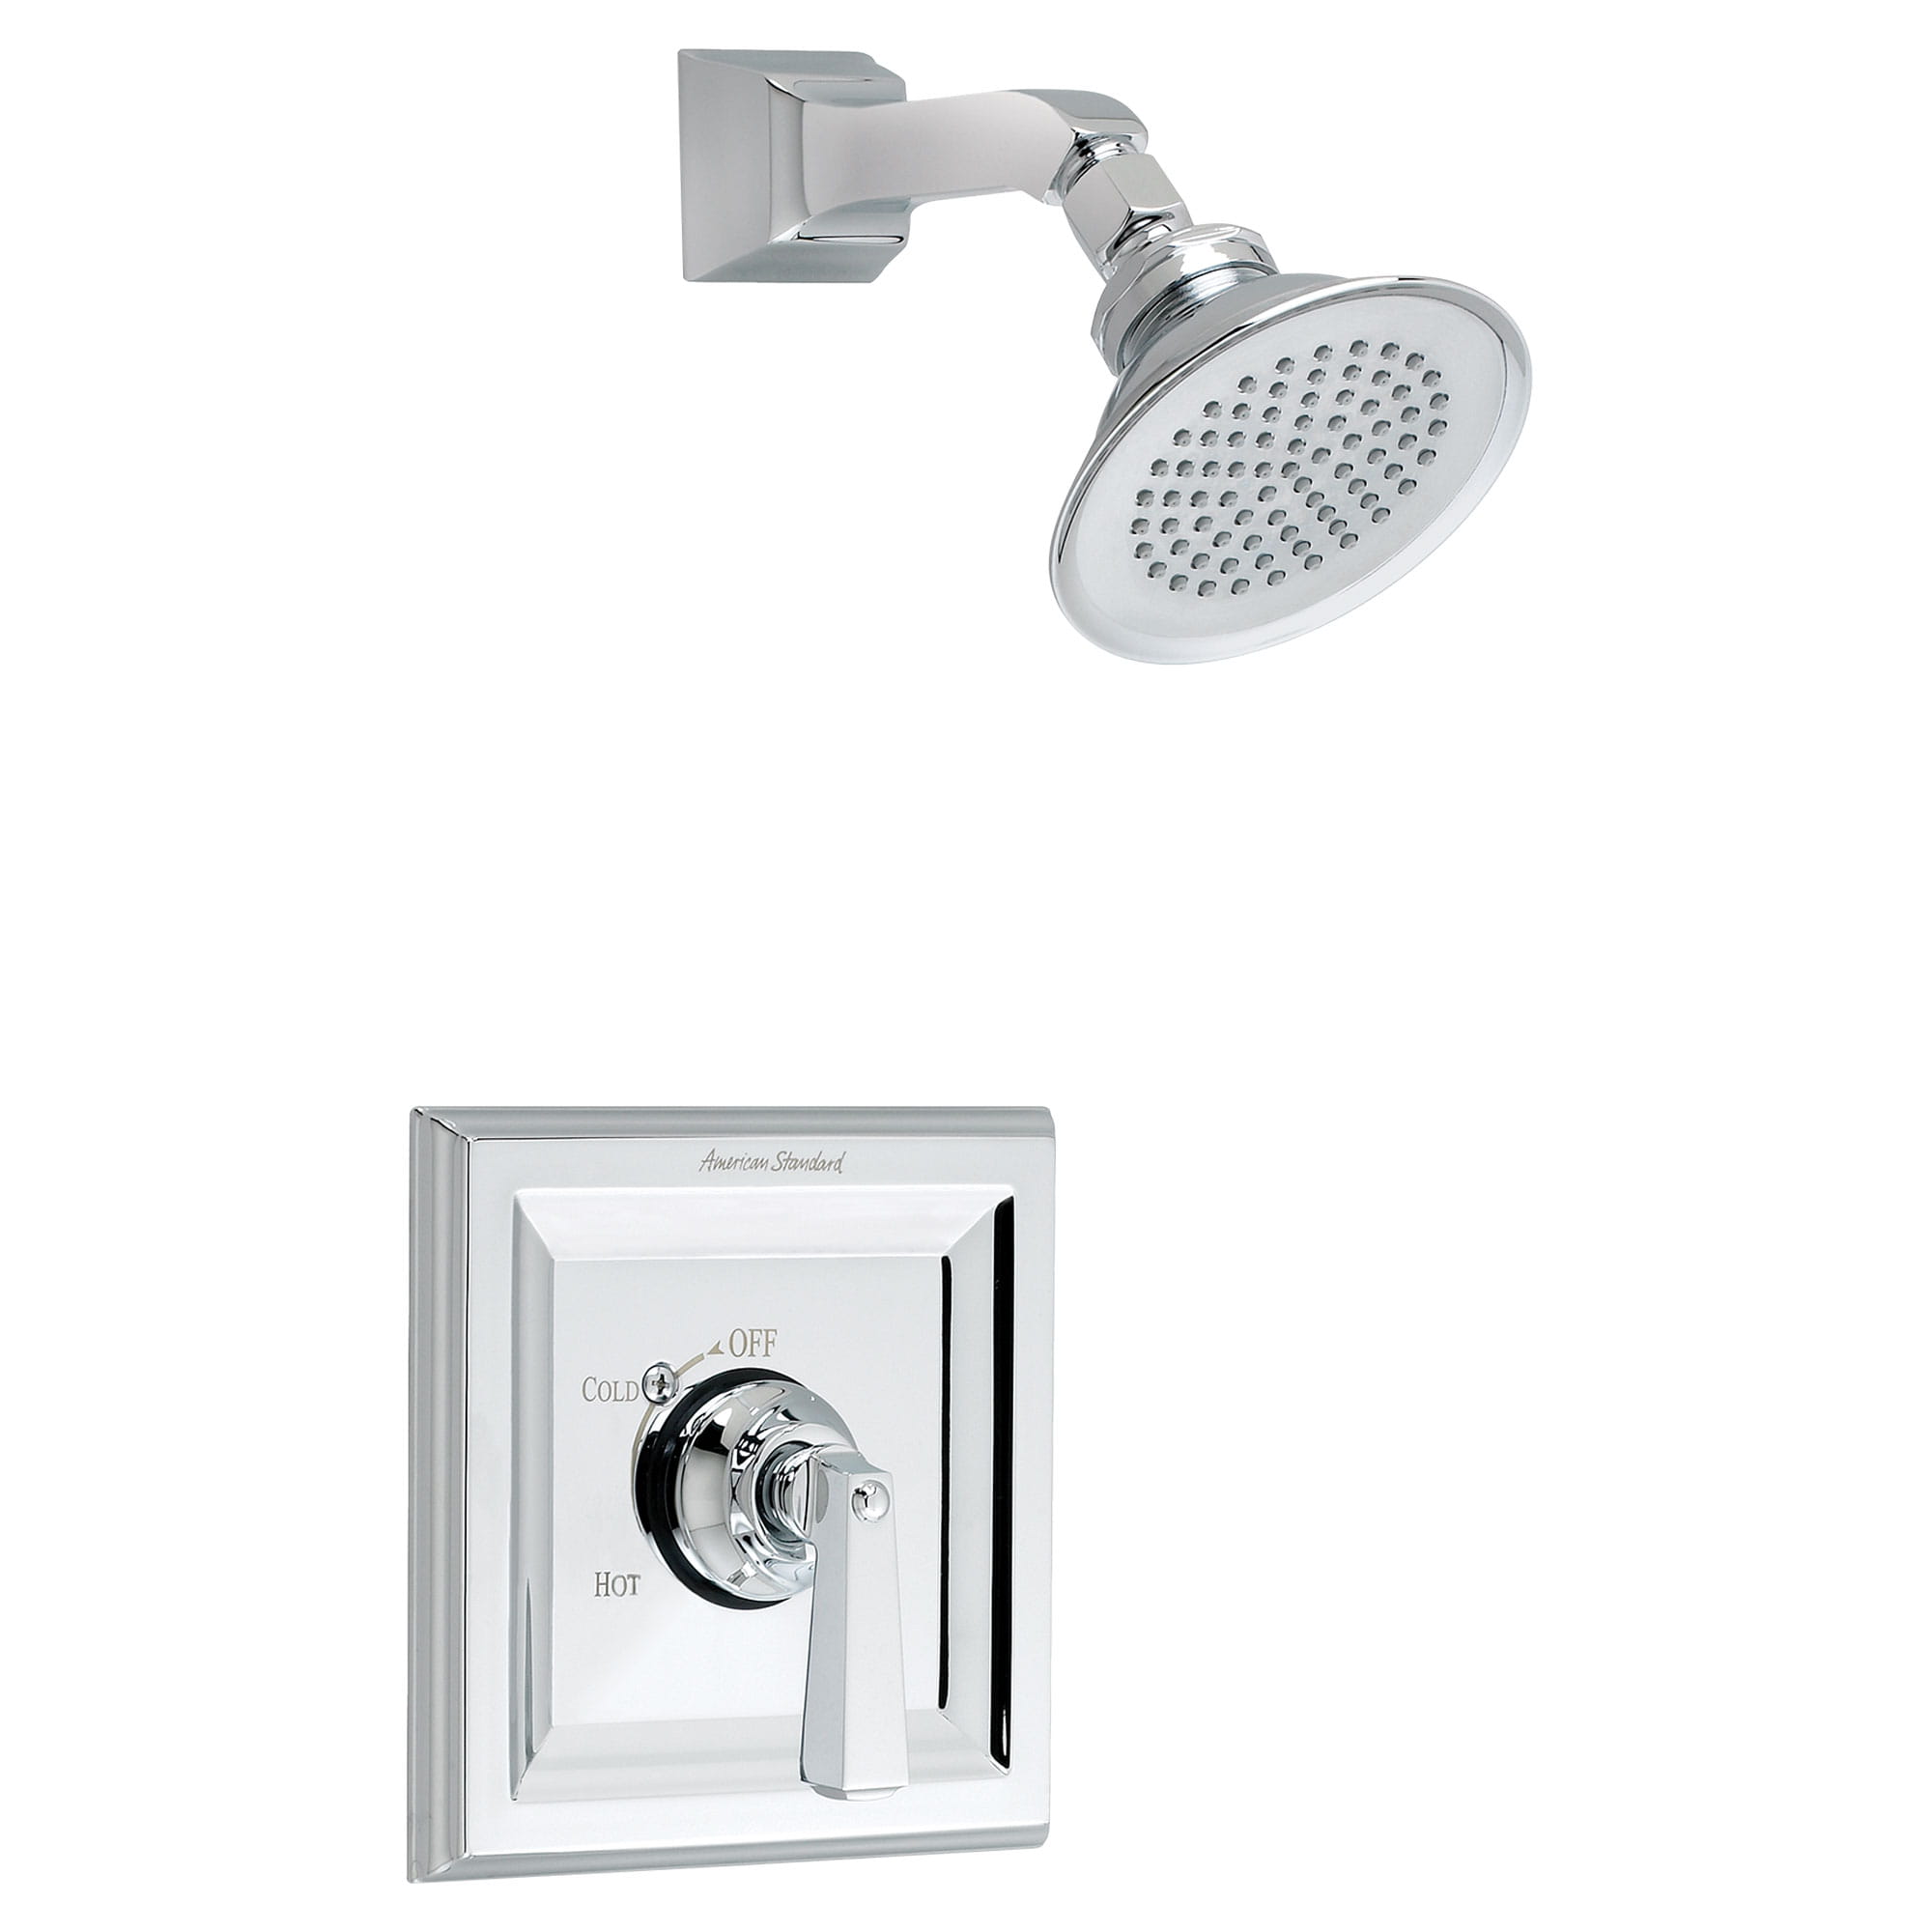 Town Square 25 GPM Shower Trim Kit with Rain Showerhead and Lever Handle CHROME